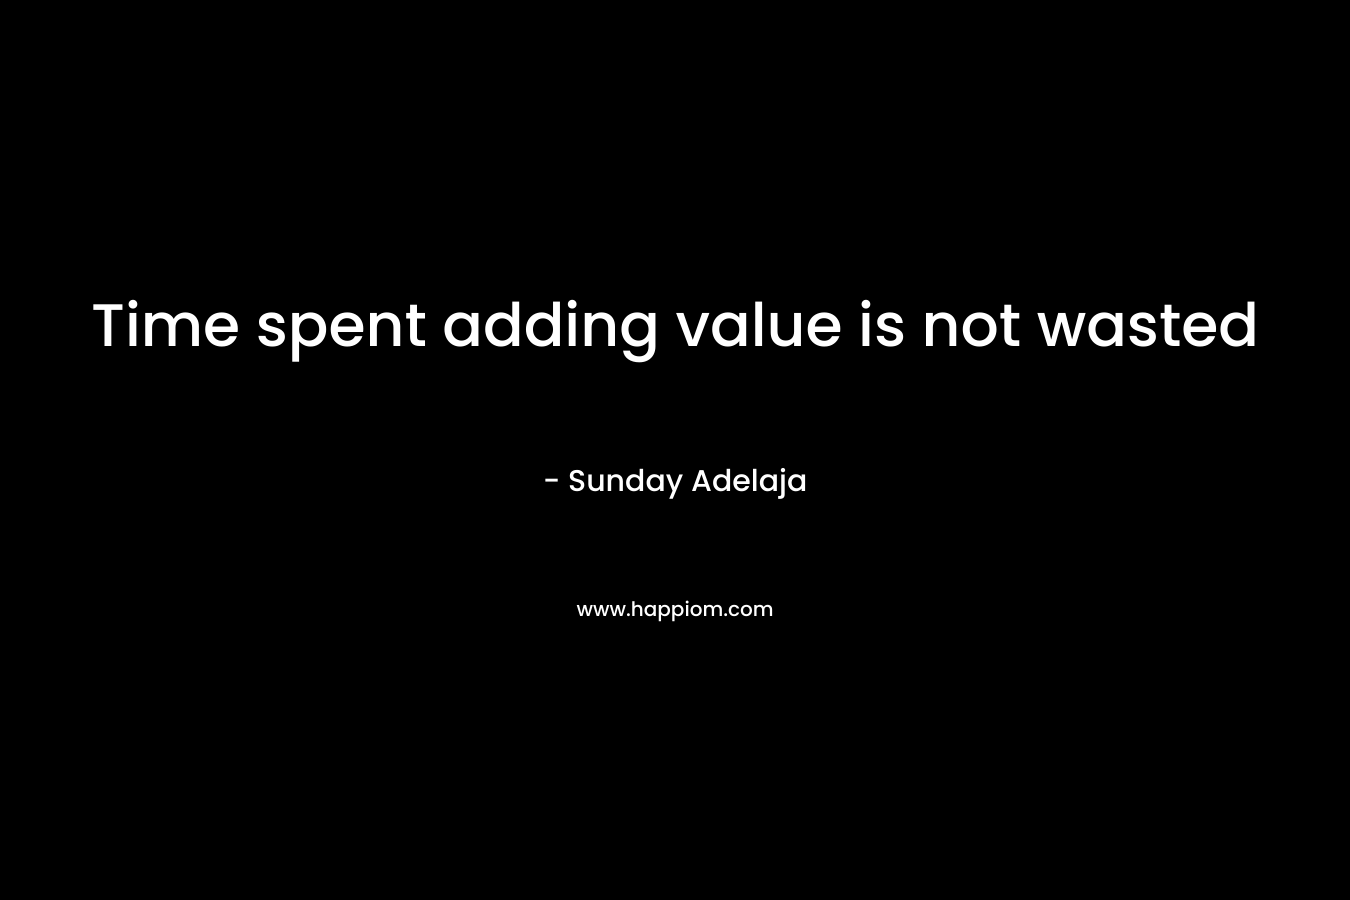 Time spent adding value is not wasted